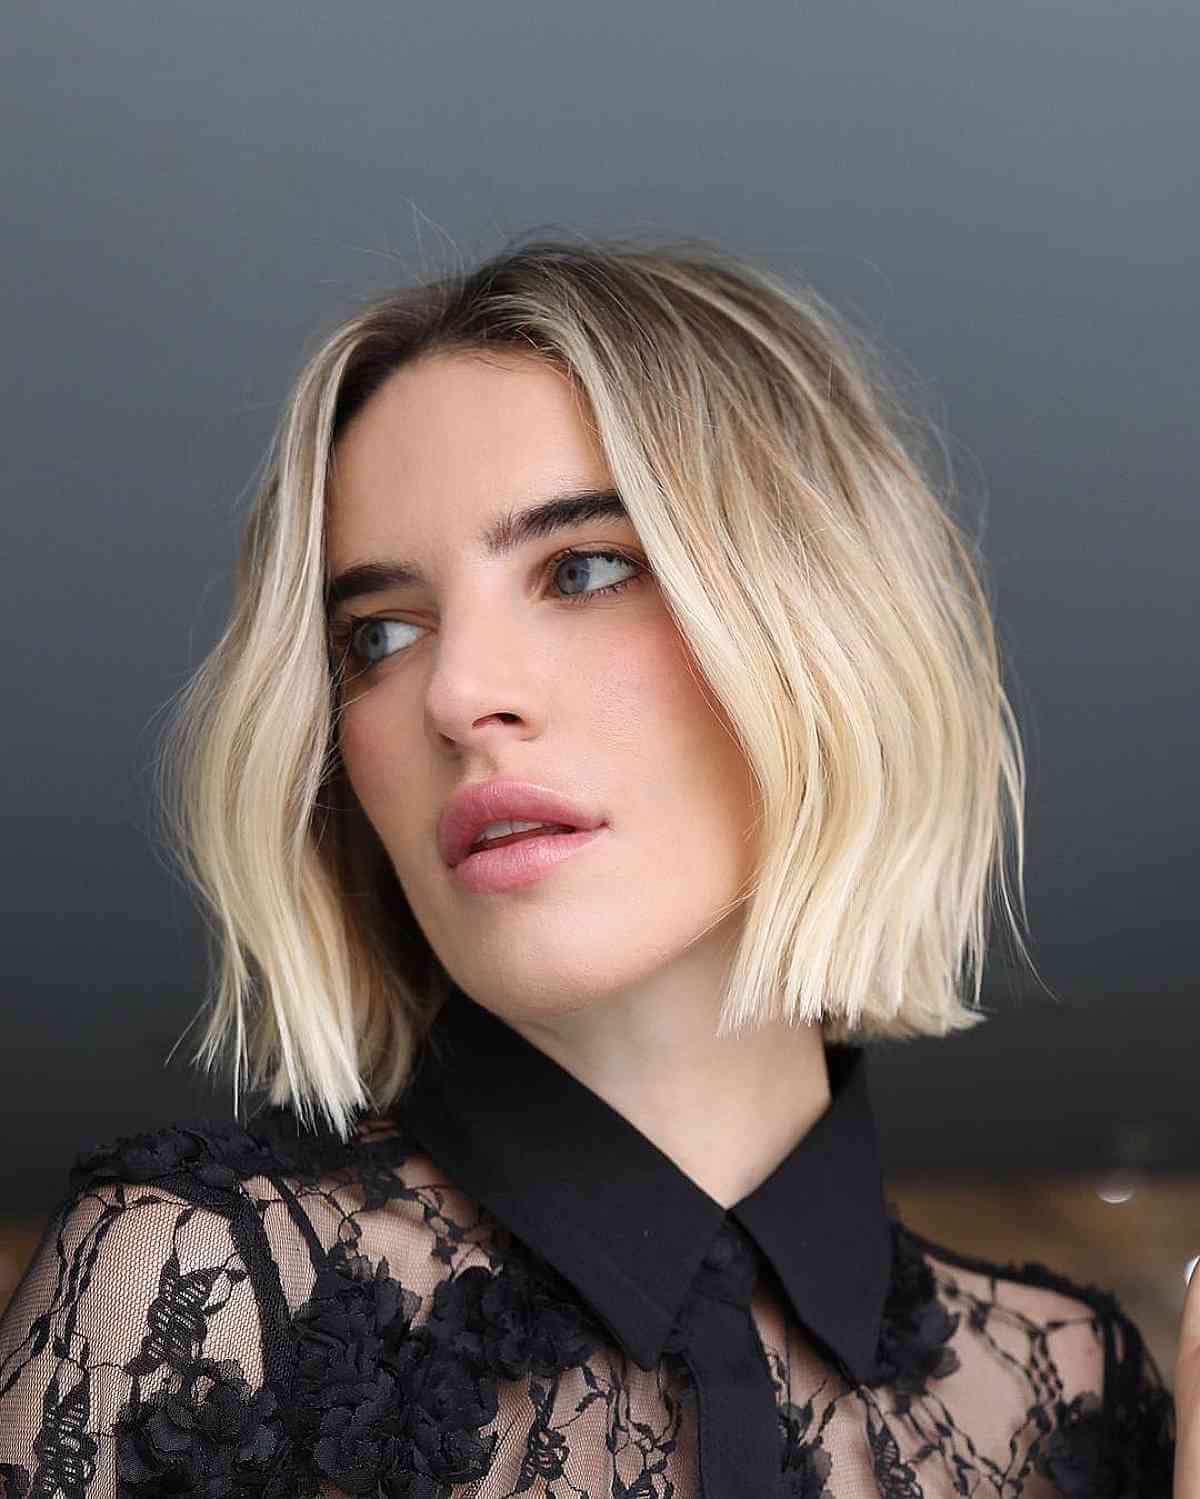 Youthful chic and textured blunt cuts